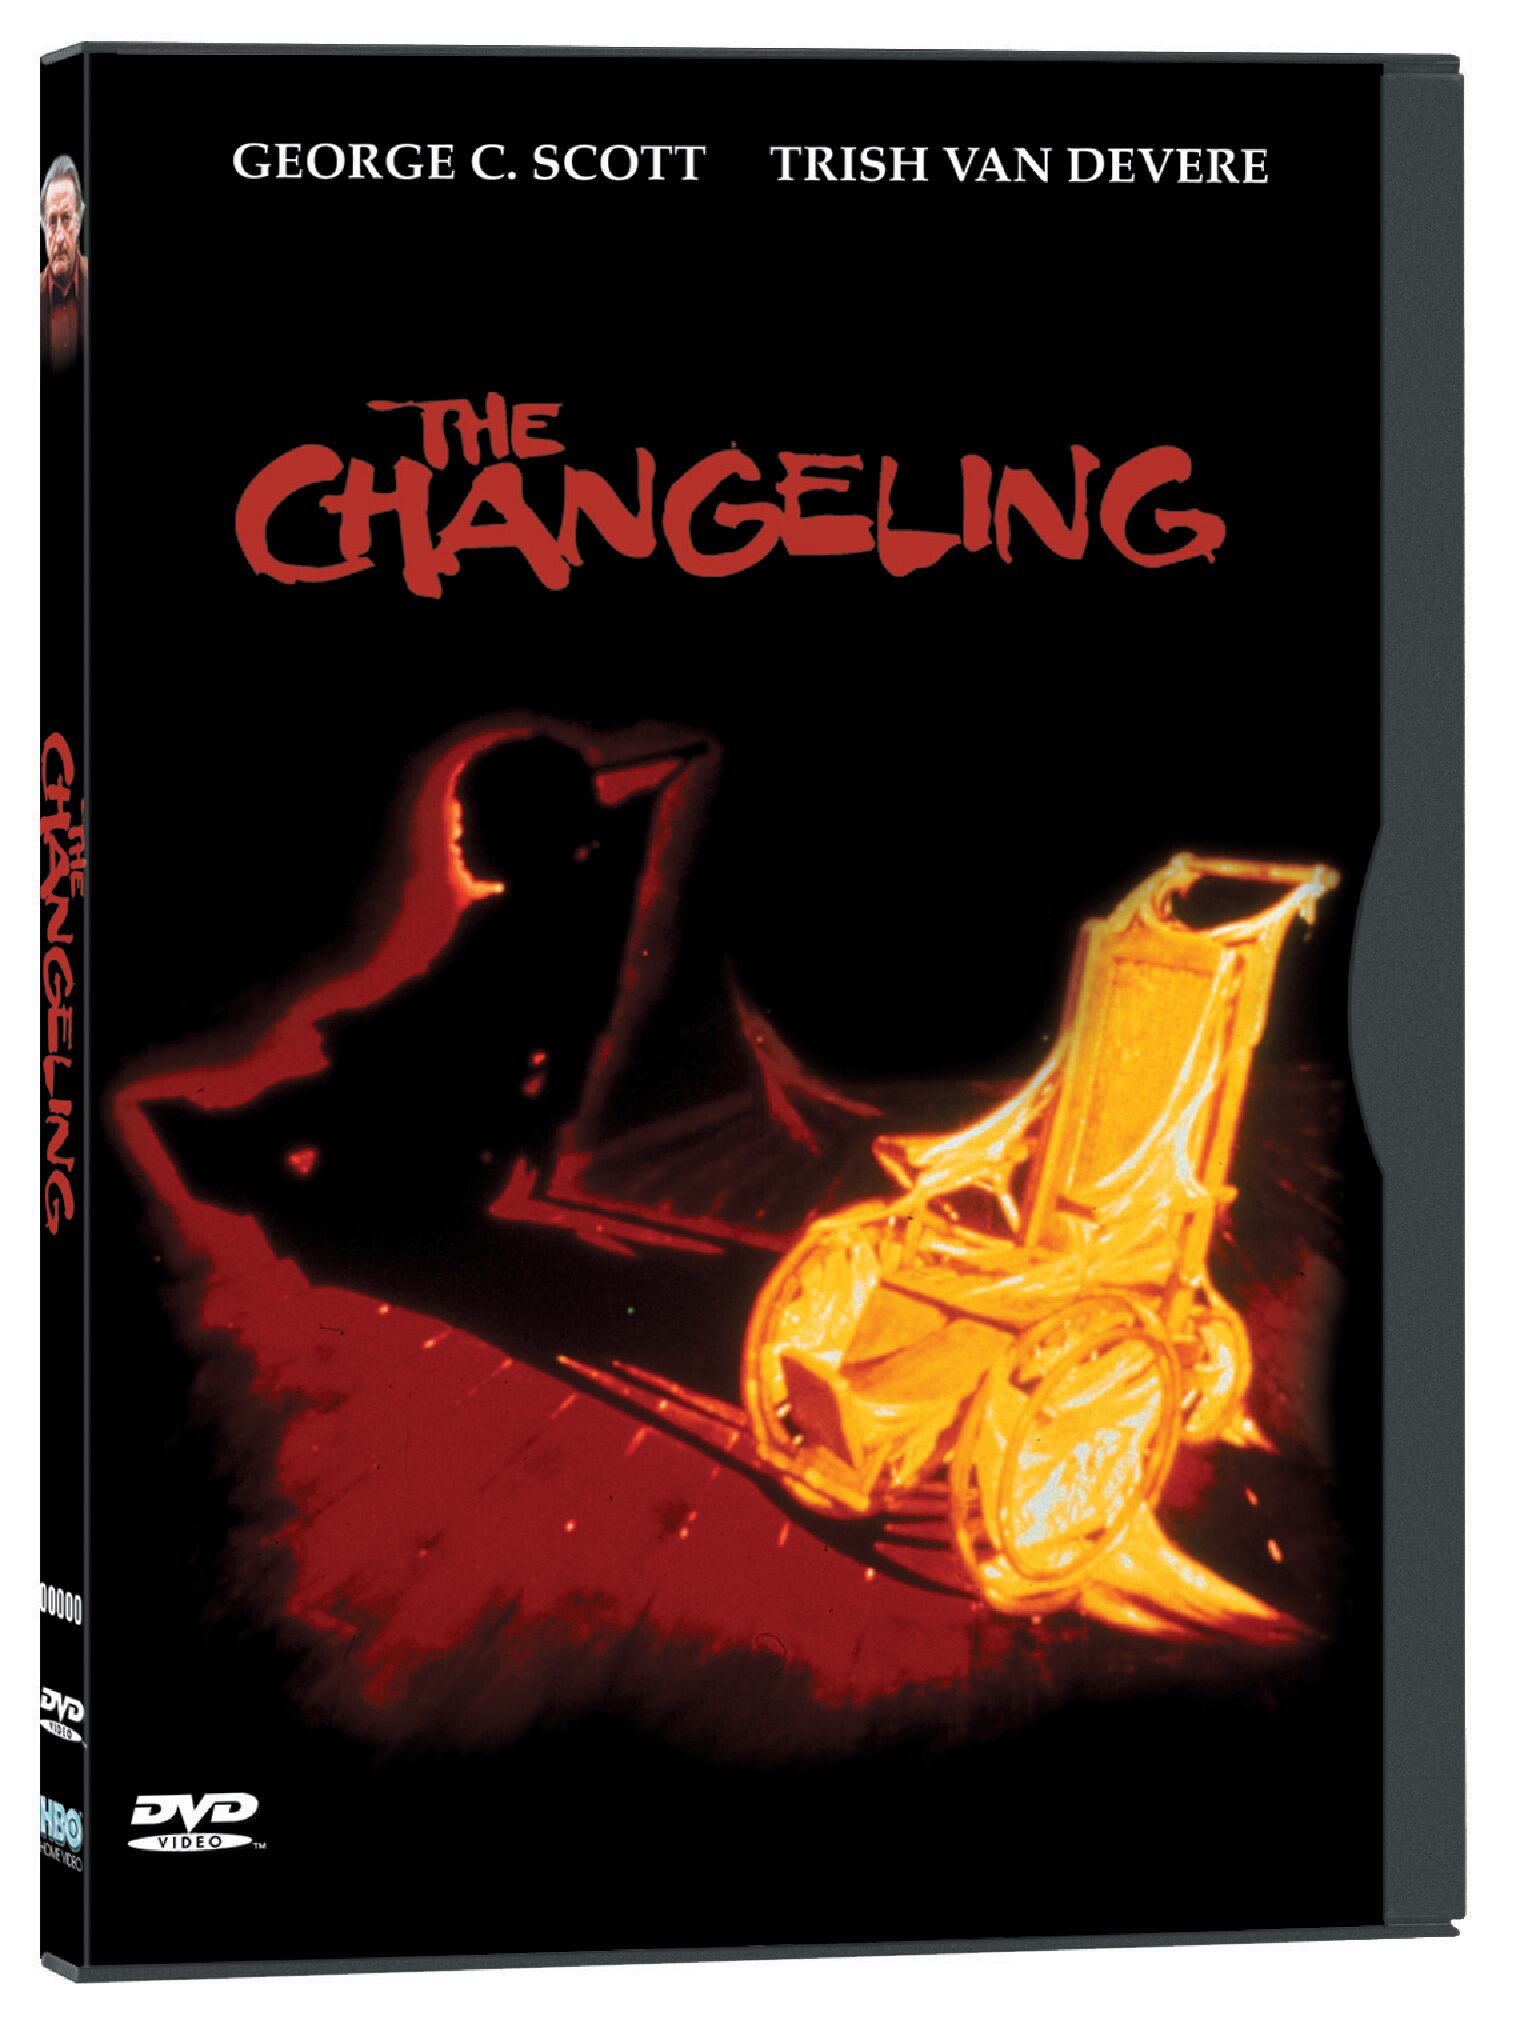 The Changeling - DVD [ 1980 ]  - Horror Movies On DVD - Movies On GRUV